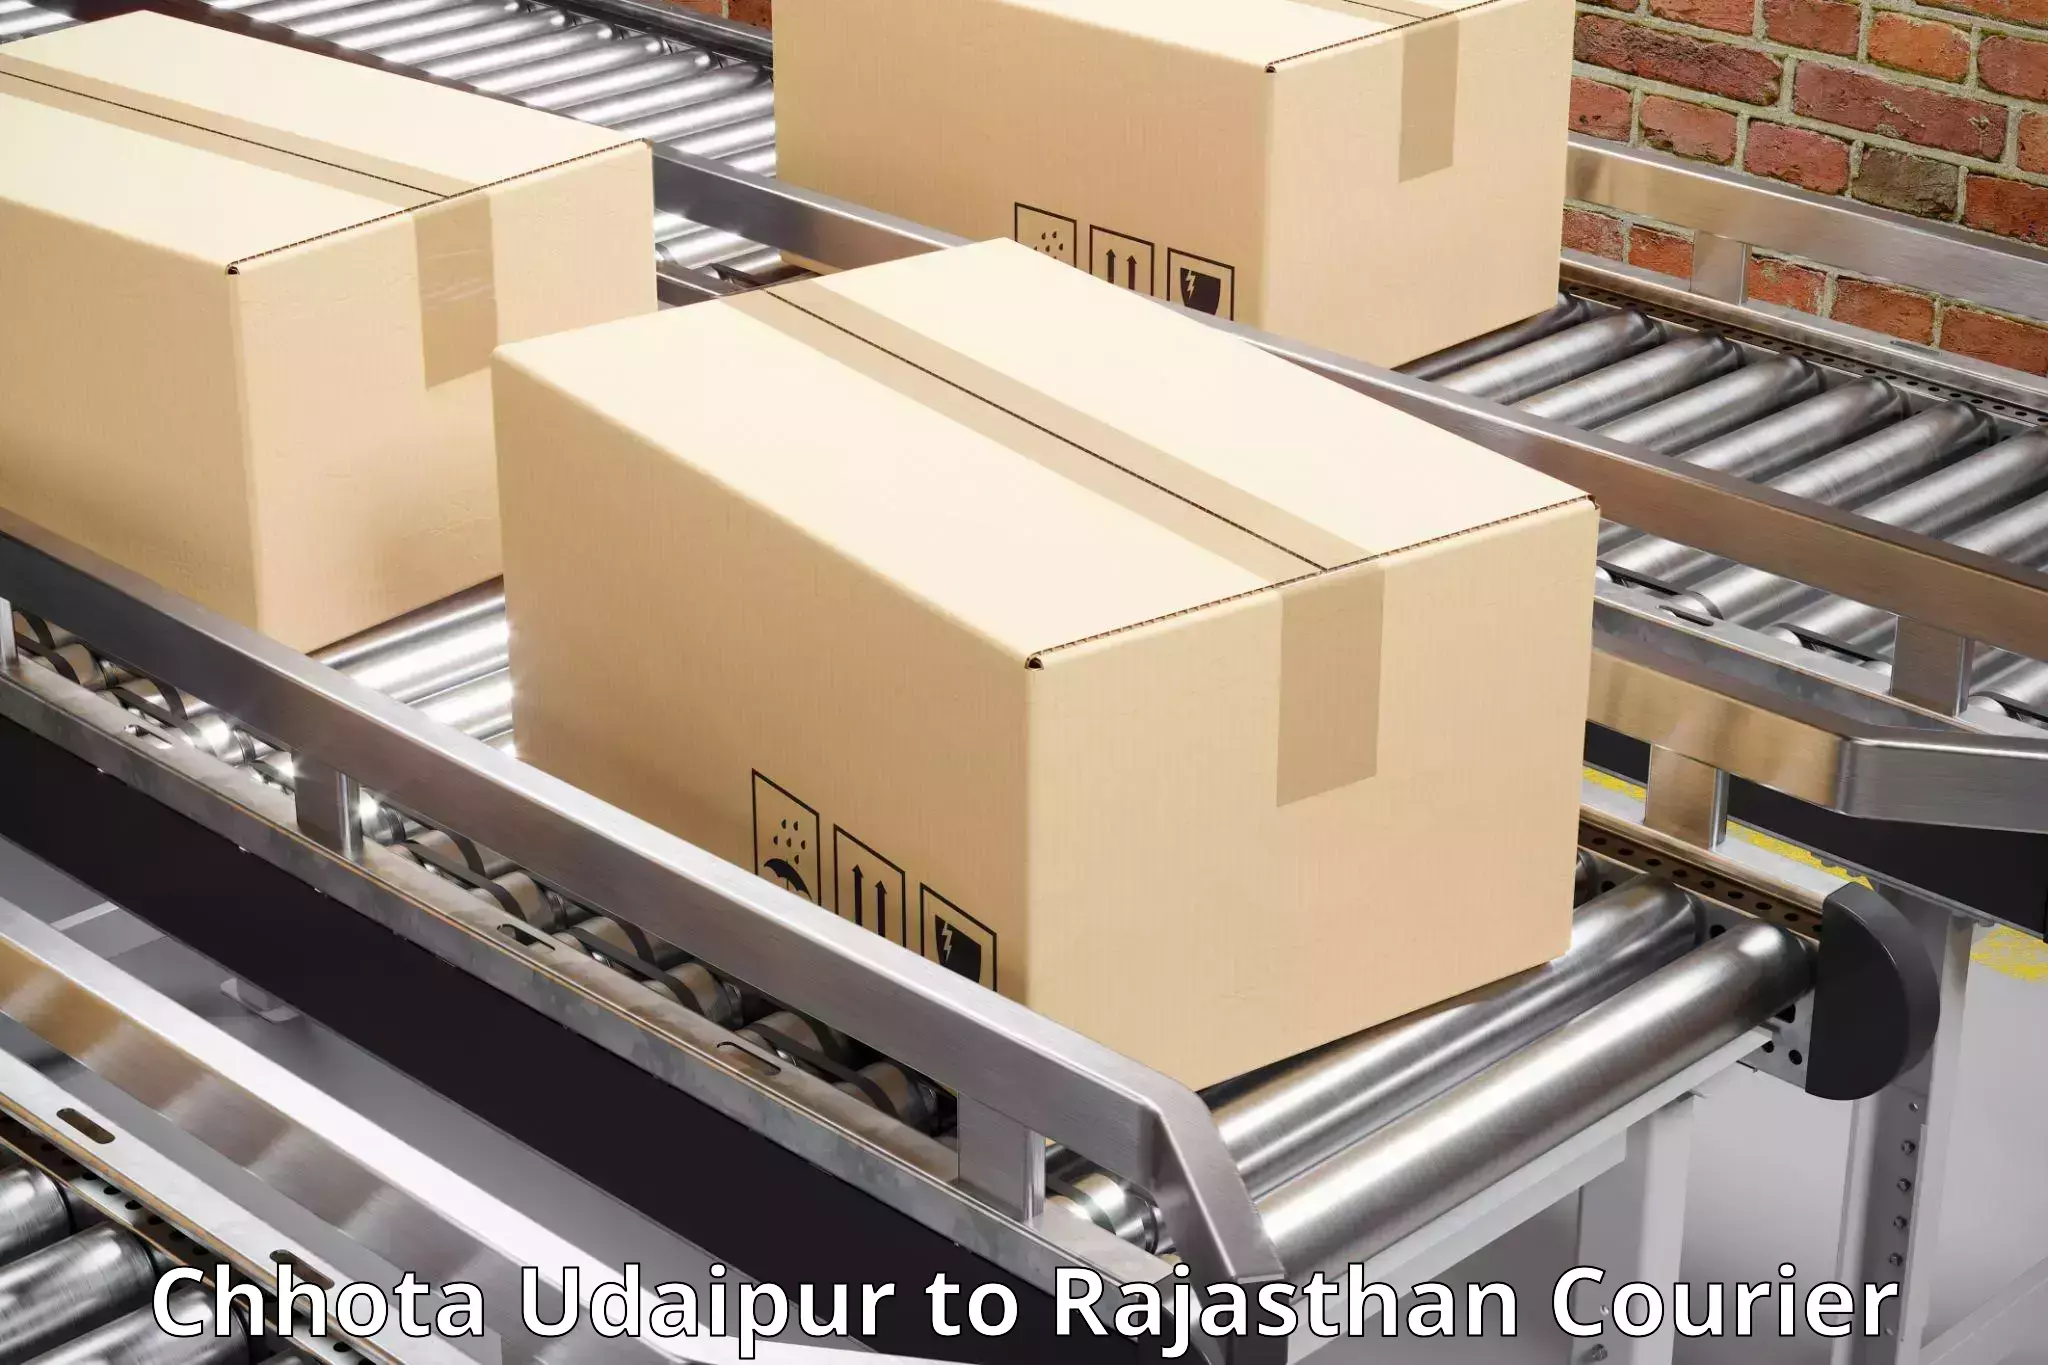 24/7 shipping services Chhota Udaipur to Pilani